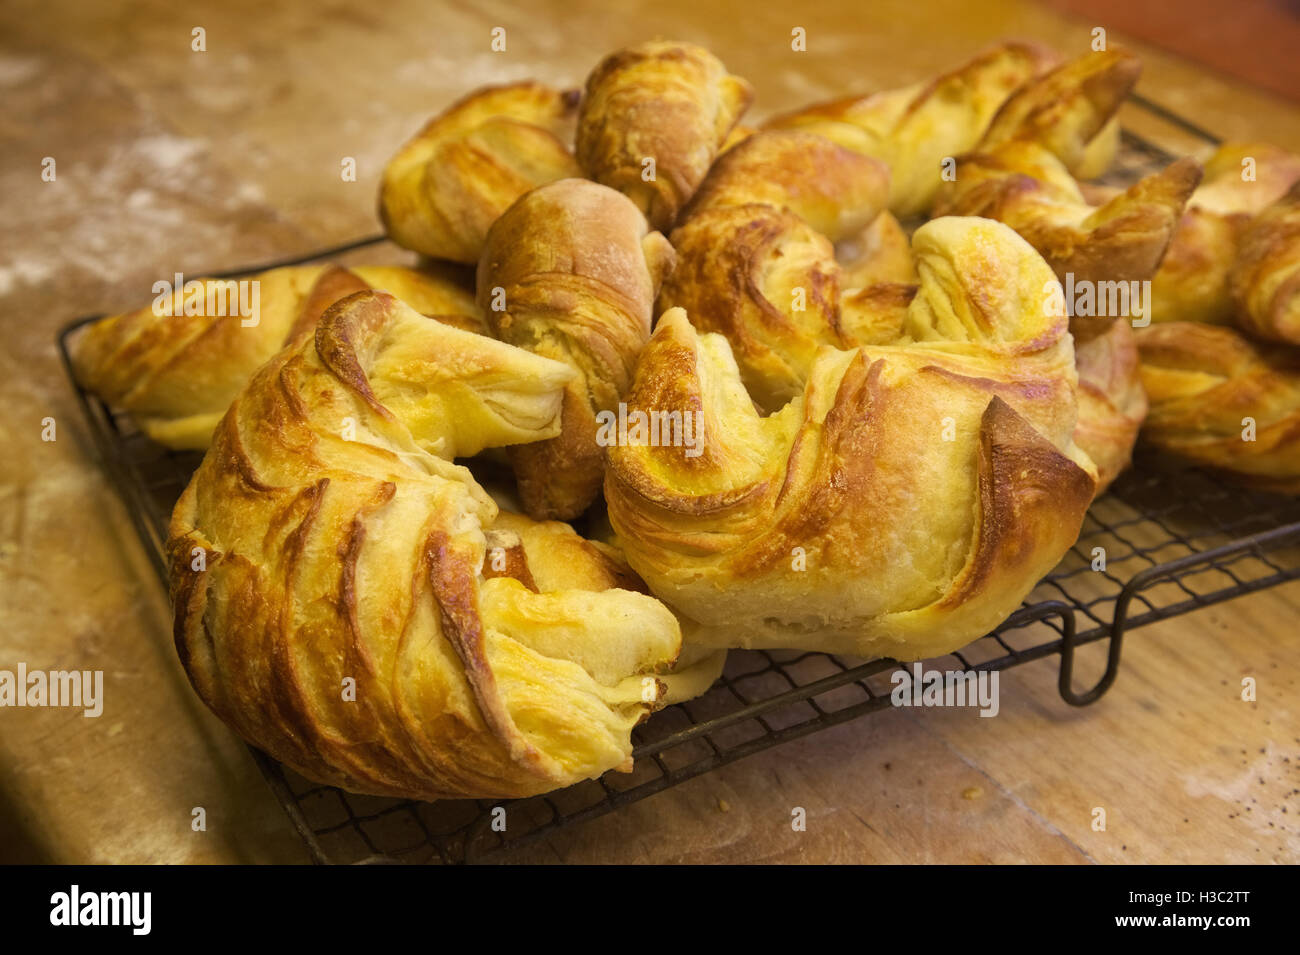 Domestic baking - home made croissants Stock Photo